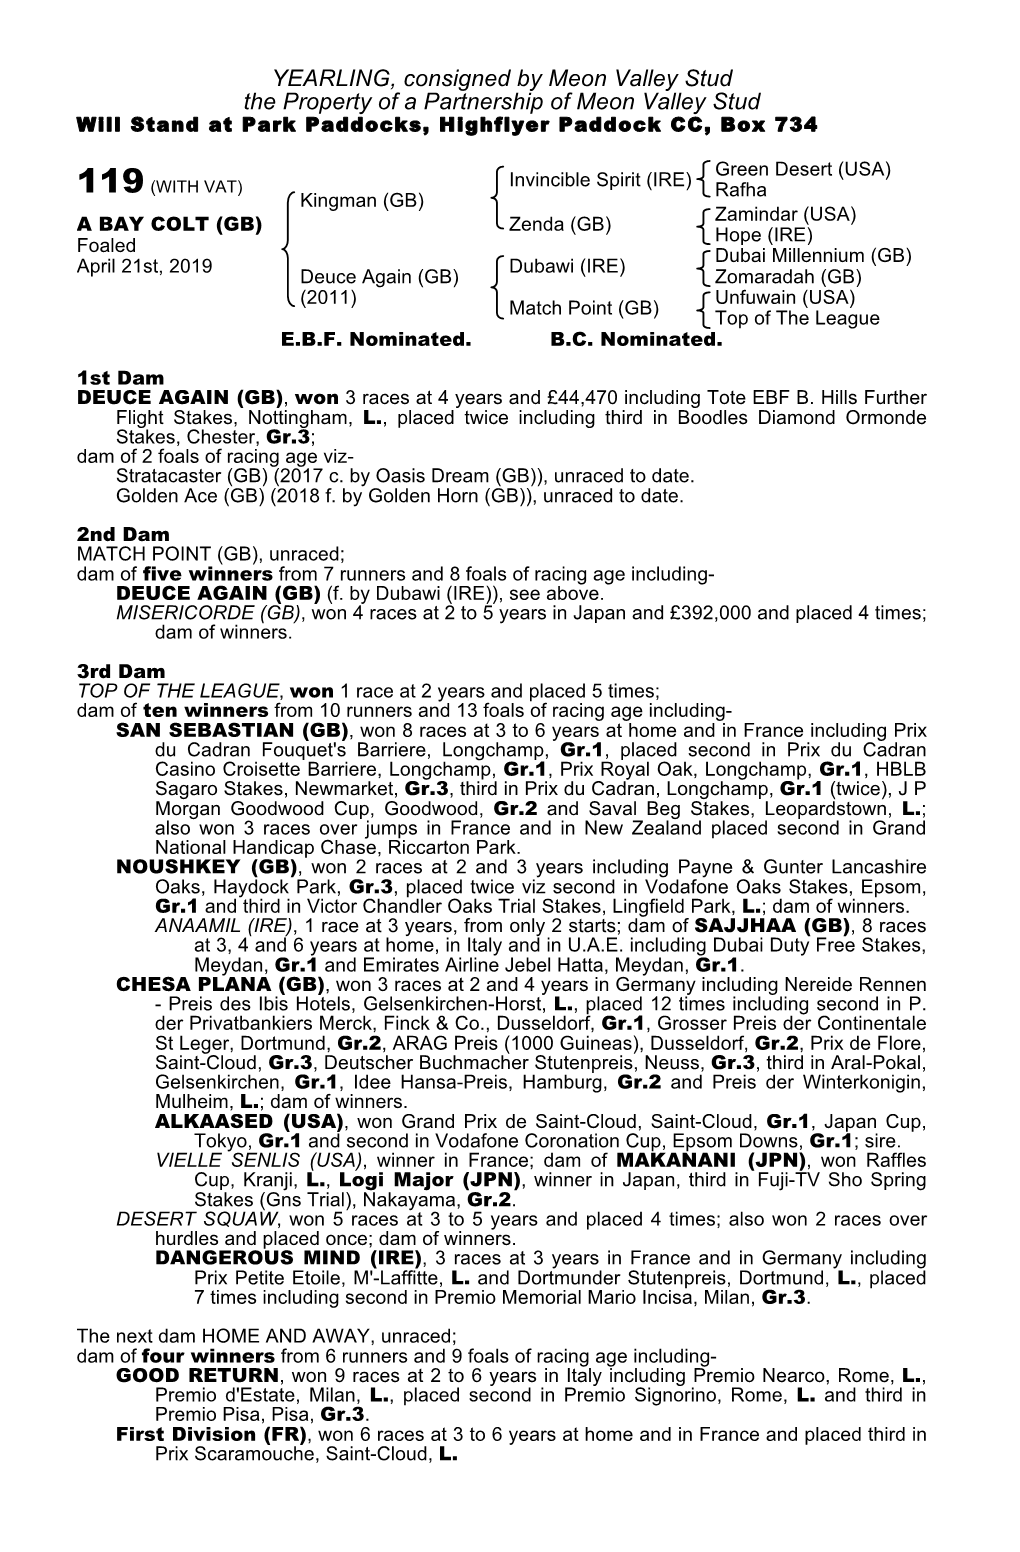 YEARLING, Consigned by Meon Valley Stud the Property of a Partnership of Meon Valley Stud Will Stand at Park Paddocks, Highflyer Paddock CC, Box 734